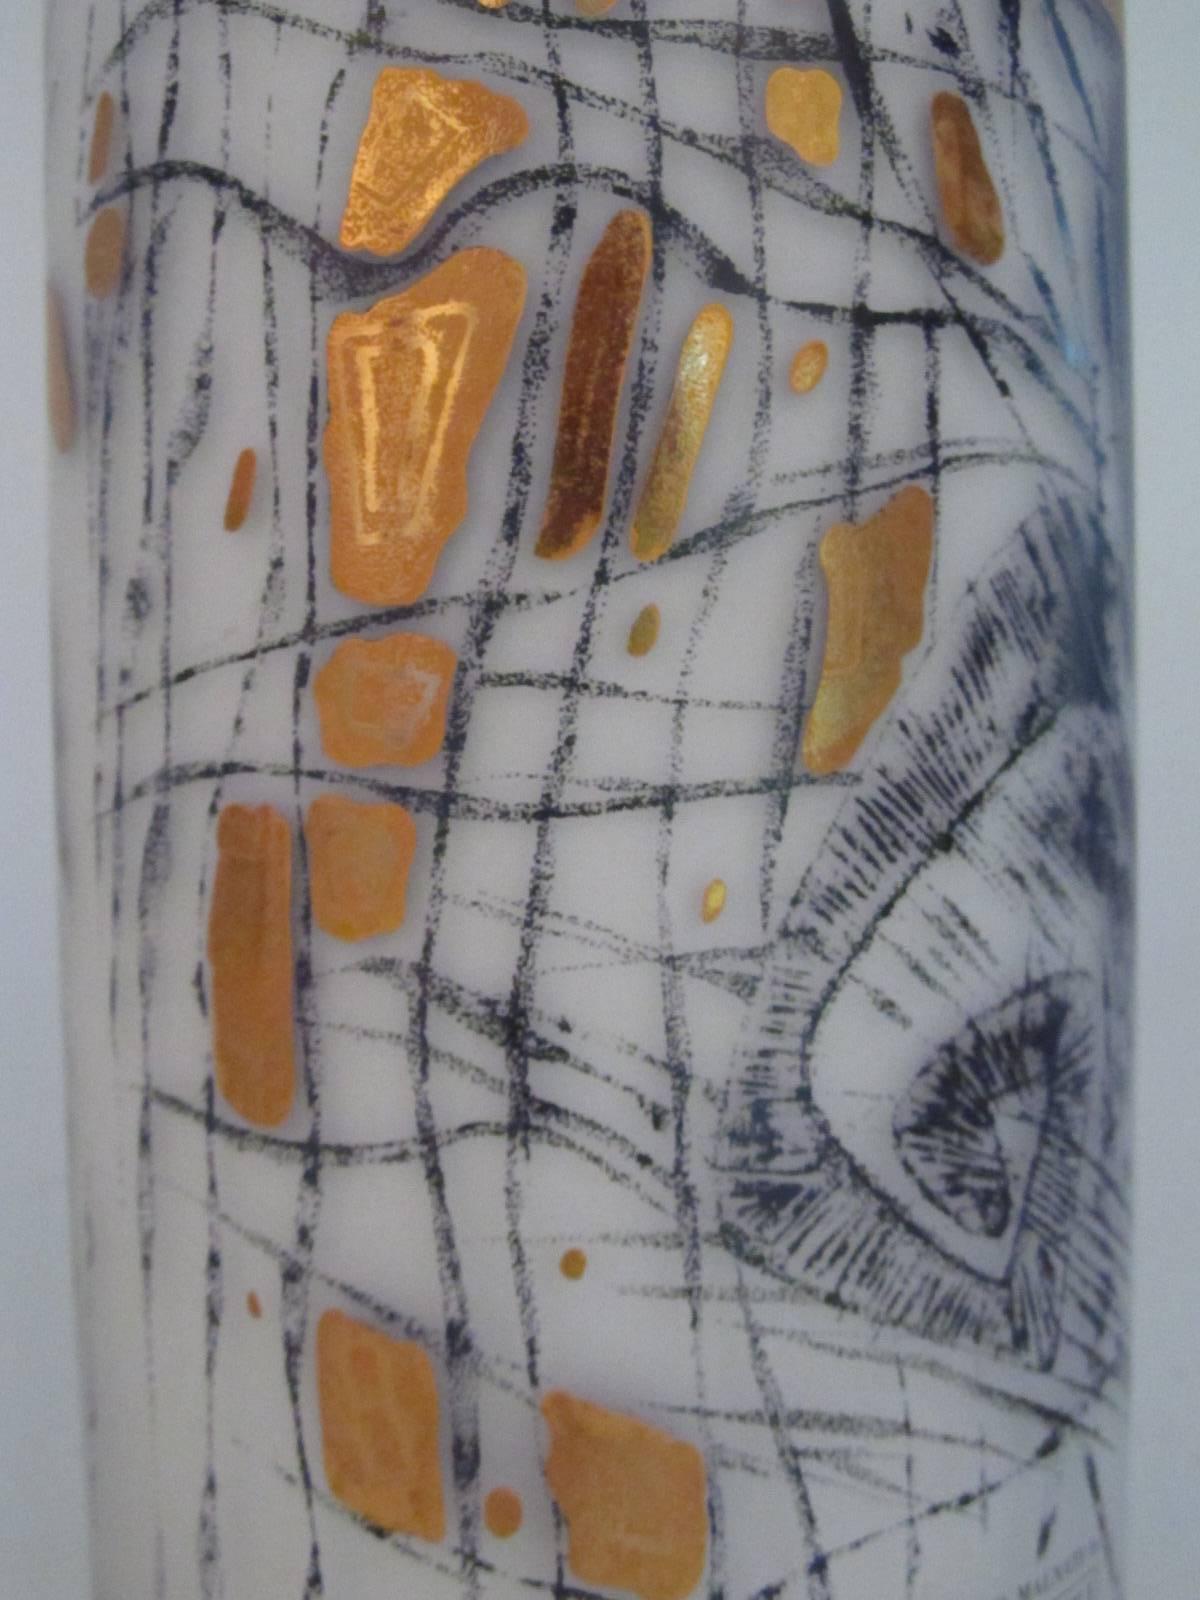 Enamel Carlo Malnati Italian Glass Vase with Abstract Graphic Design and Gold Overlay